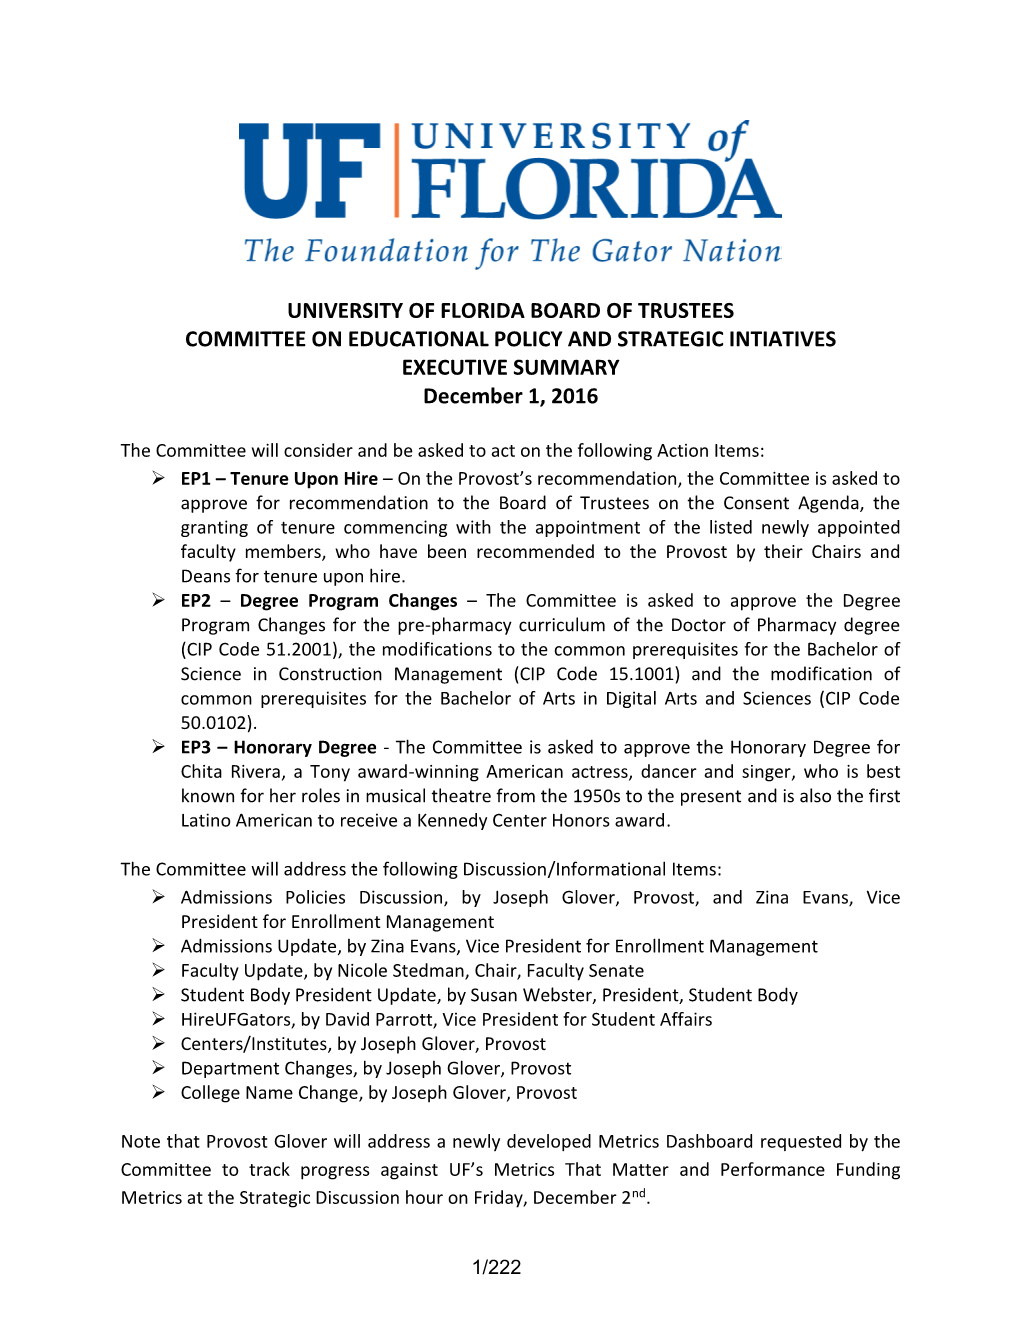 UNIVERSITY of FLORIDA BOARD of TRUSTEES COMMITTEE on EDUCATIONAL POLICY and STRATEGIC INTIATIVES EXECUTIVE SUMMARY December 1, 2016